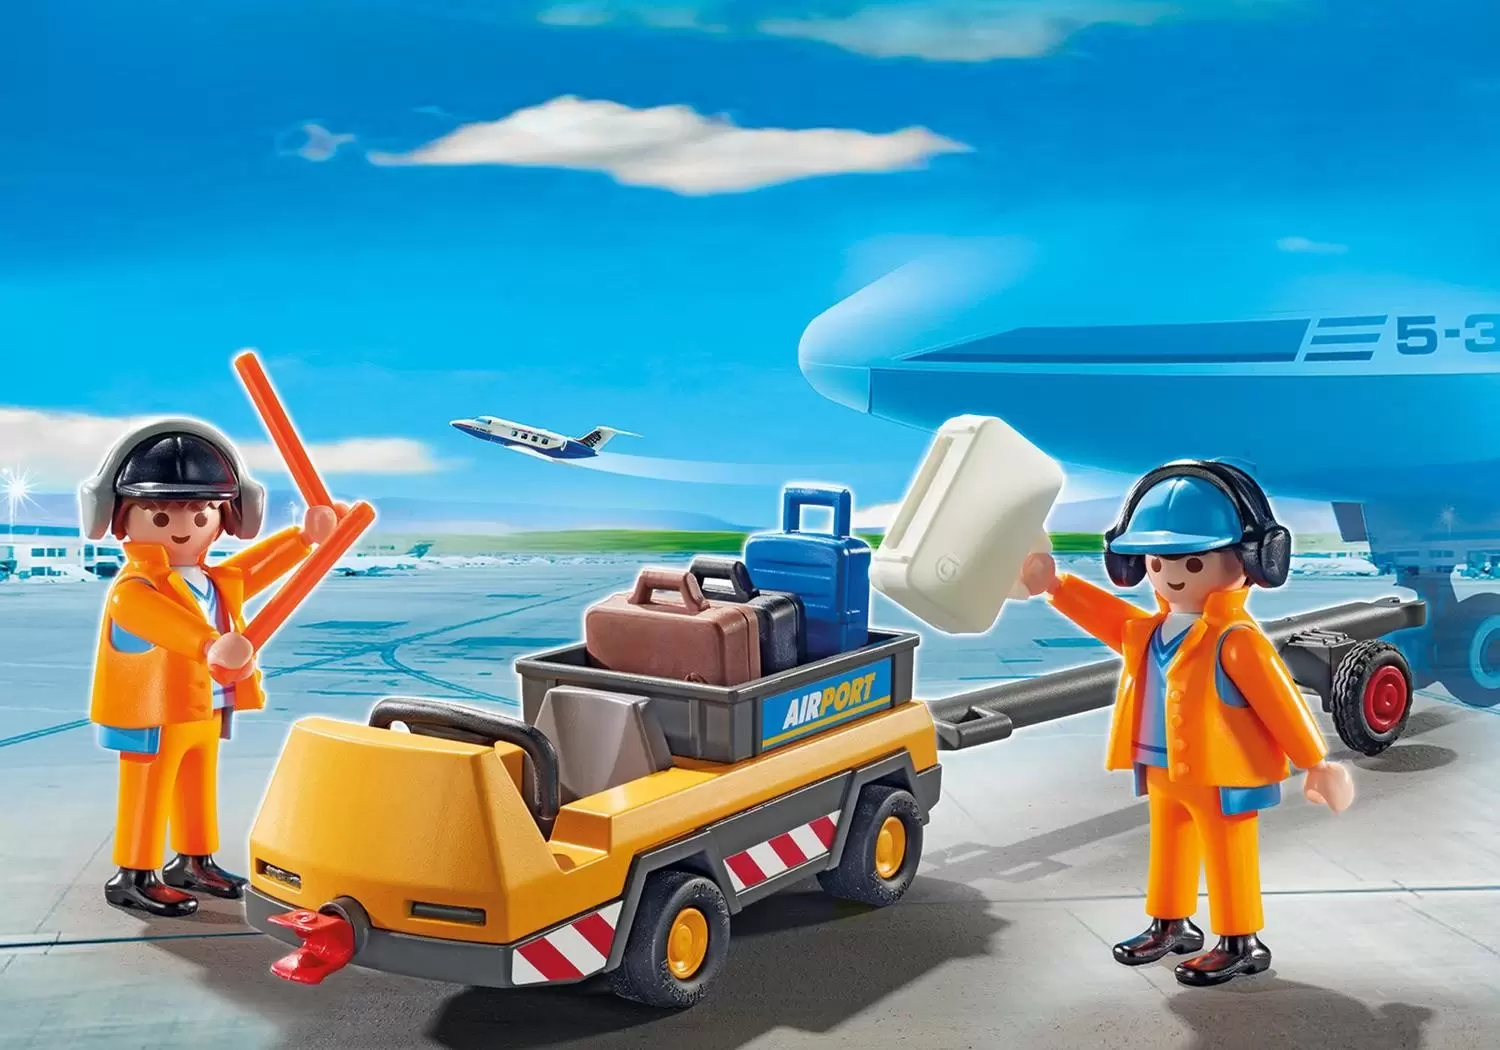 Playmobil Airport & Planes - Aircraft Tug with Ground Crew